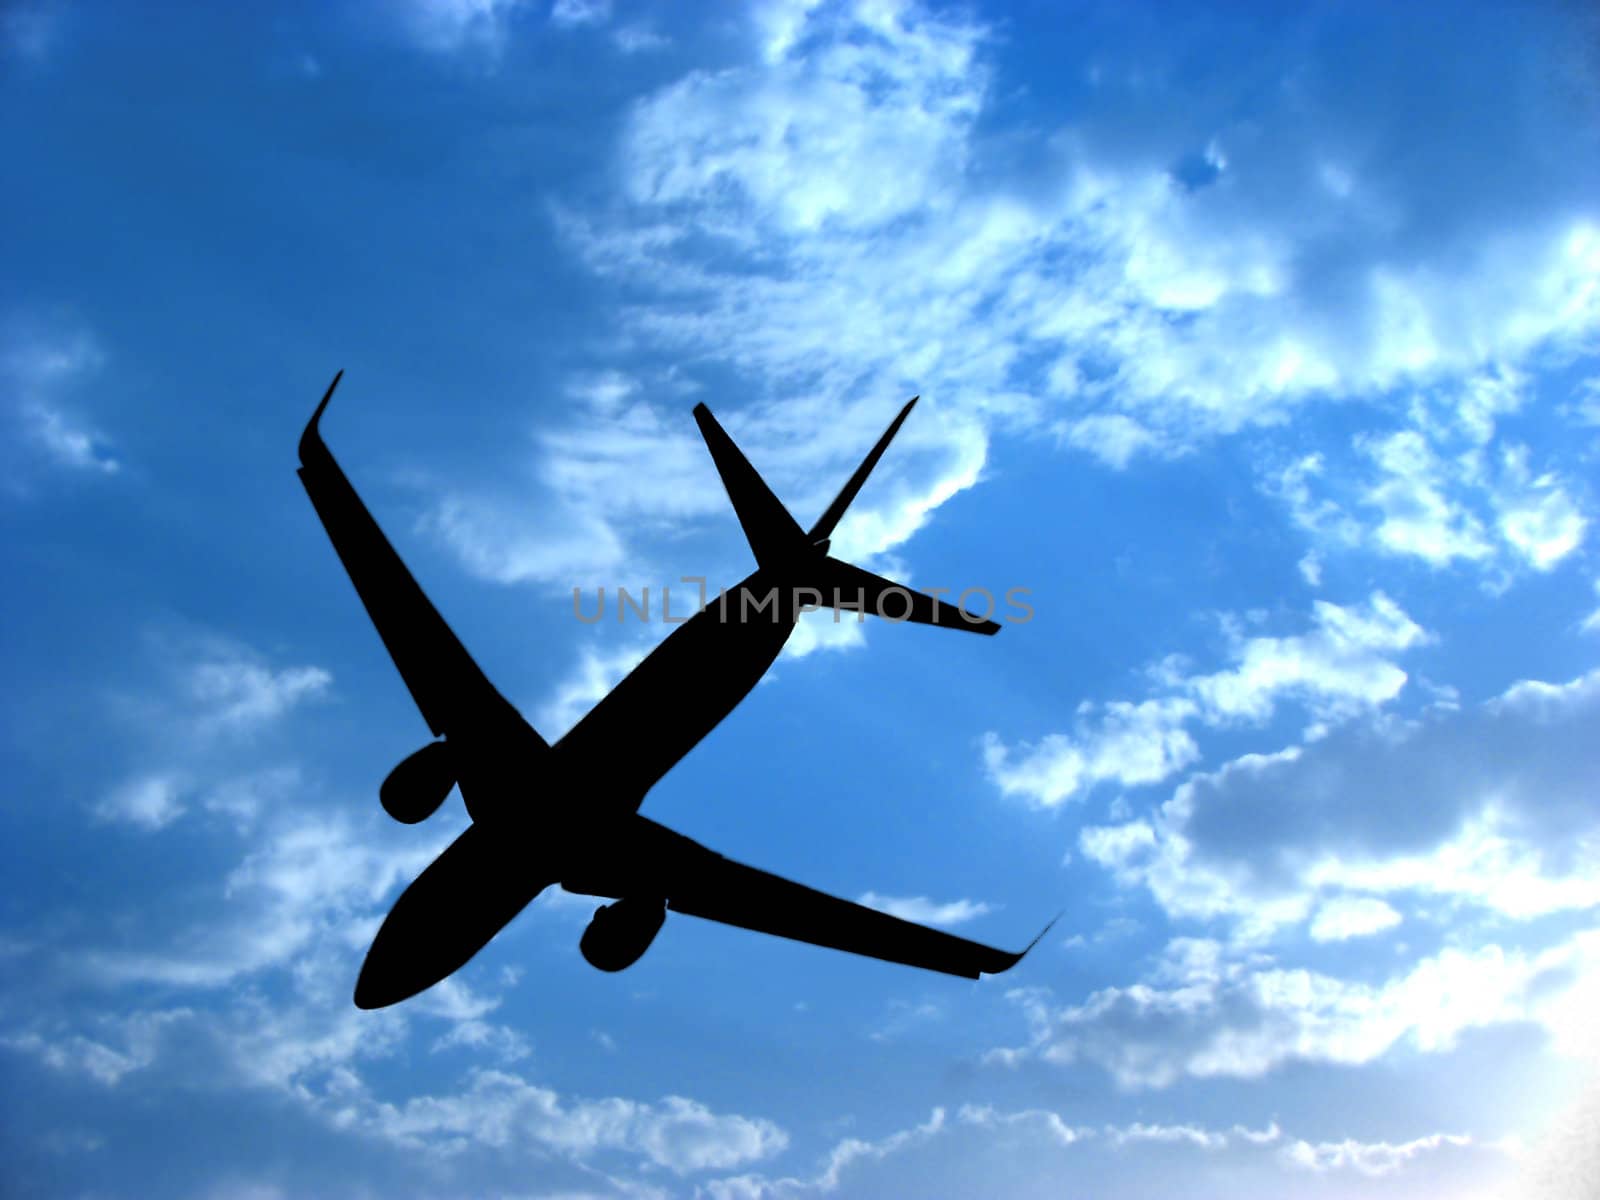 A background with a view of an airplane silhouette against the backdrop of a blue sky with little white clouds.